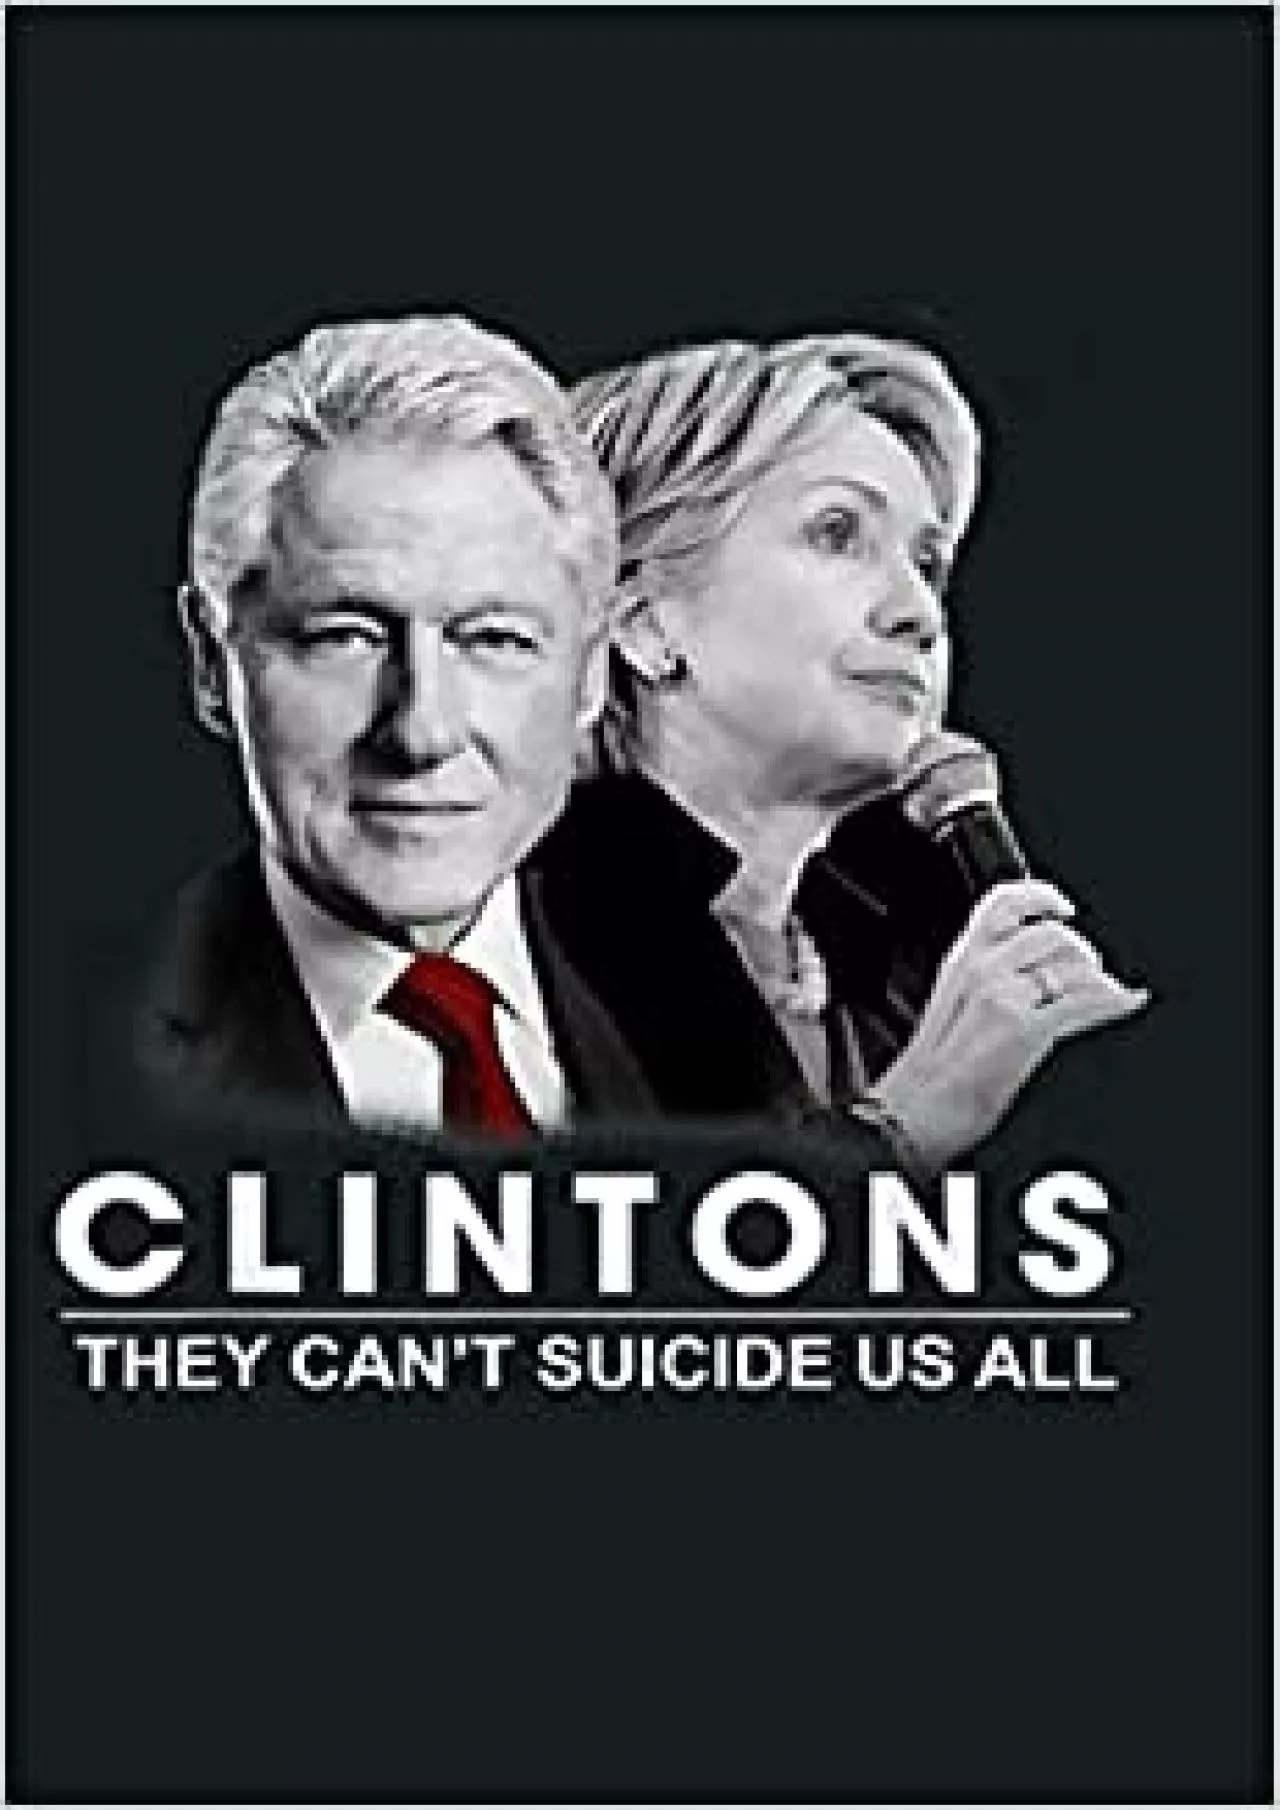 Clinton They Can T Suicide Us All: Notebook Planner - 6x9 inch Daily Planner Journal To